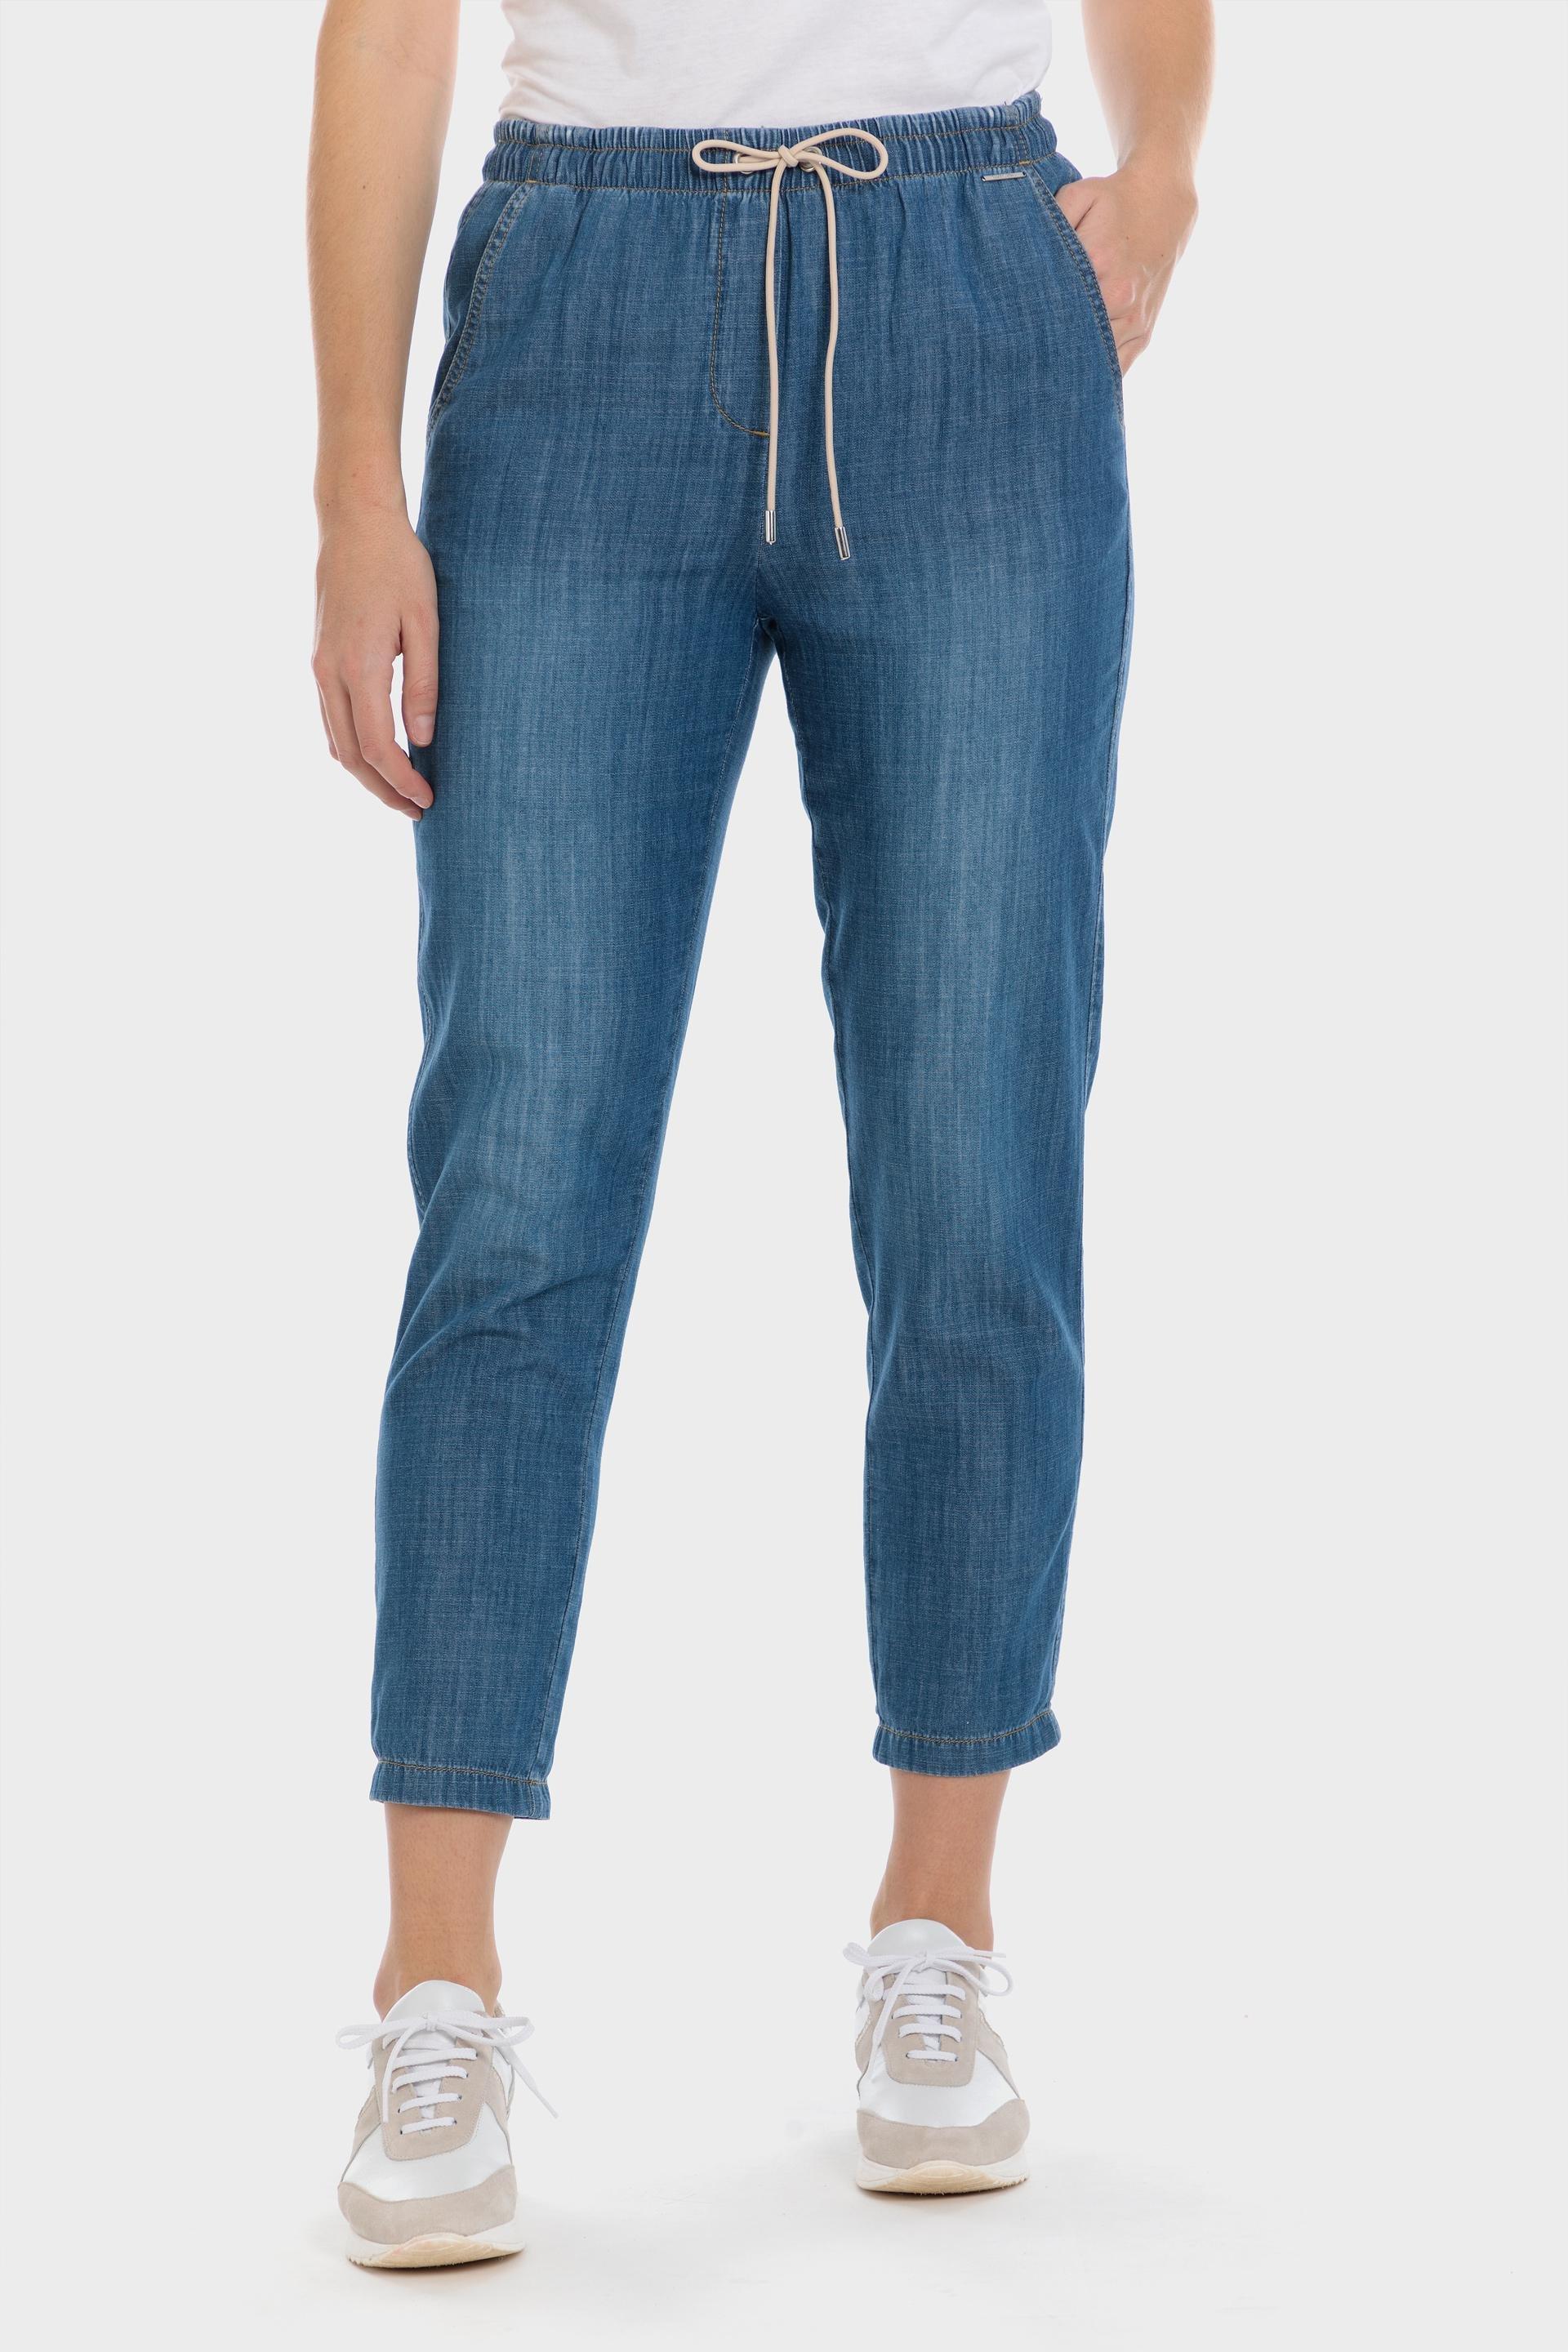 Punt Roma - Blue Chambray Trousers